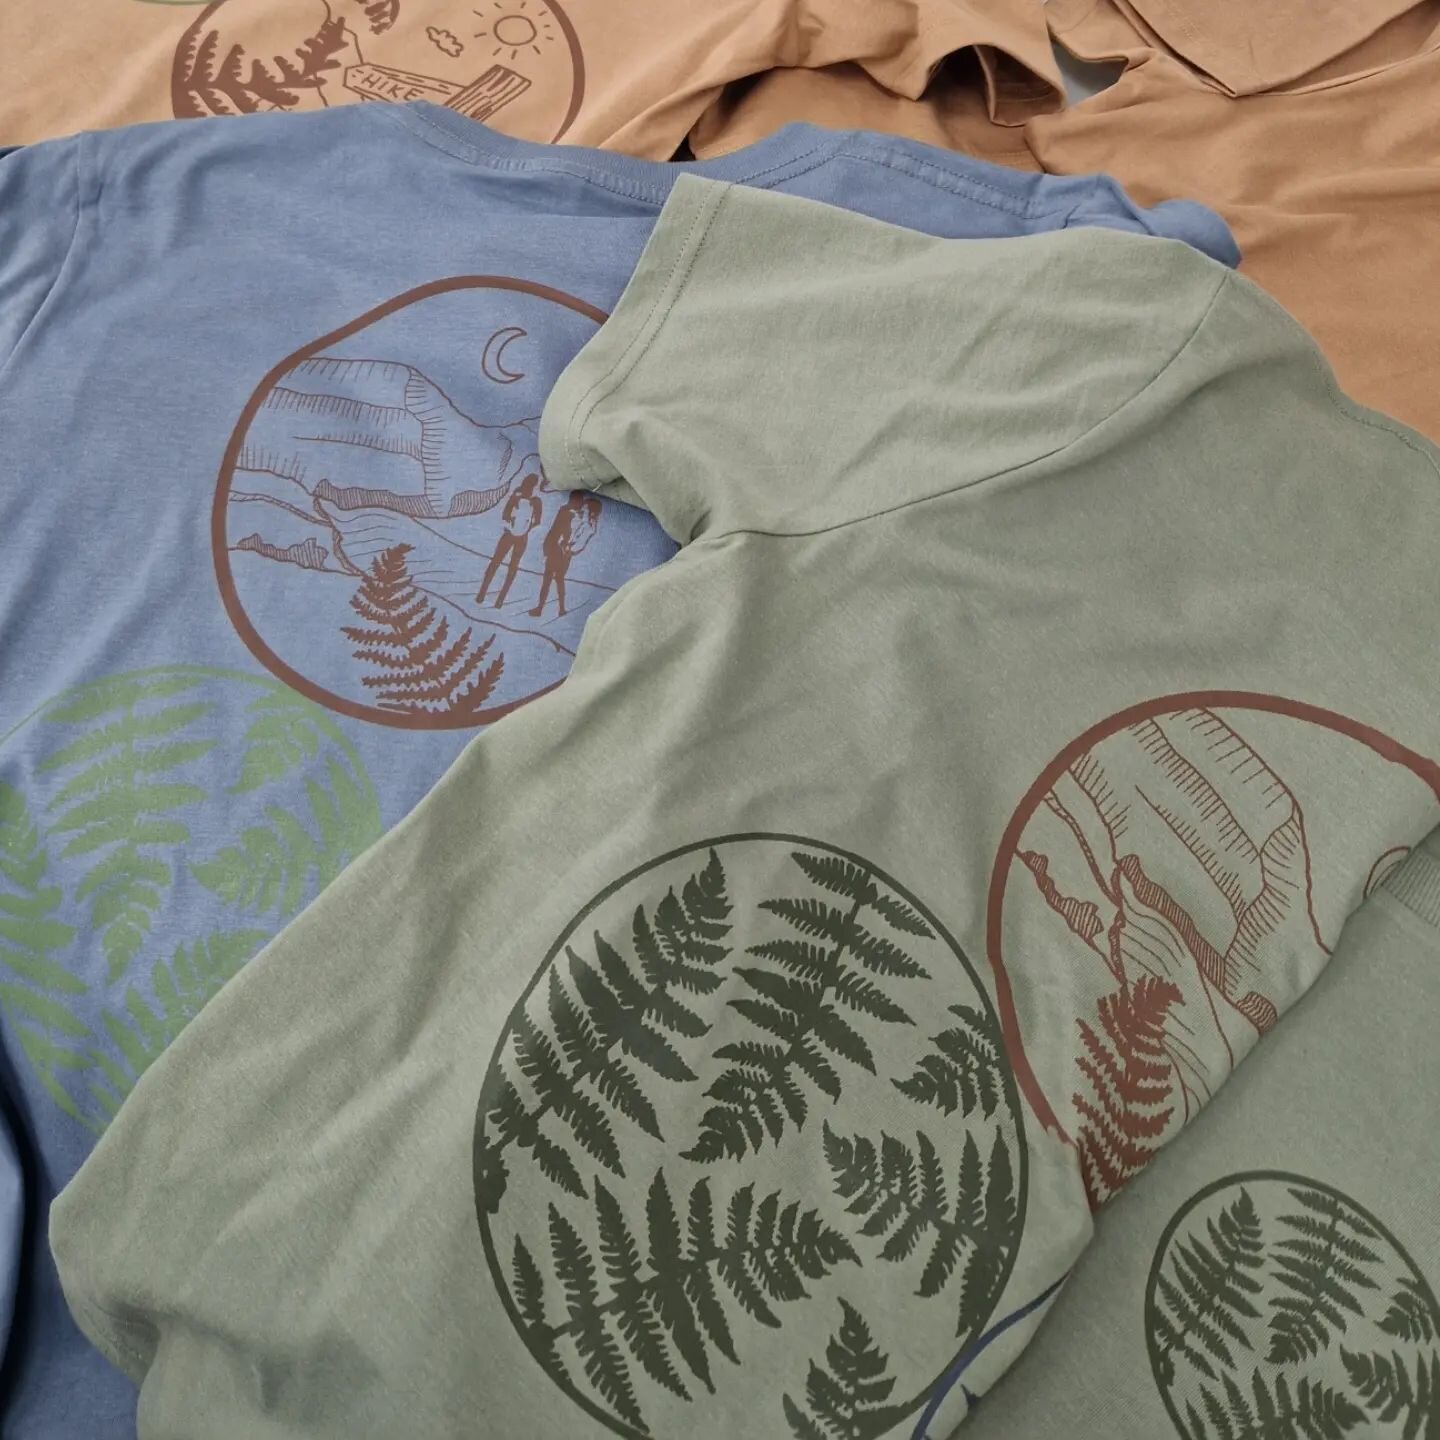 Sustainable screen printed t-shirts for my most recent project aimed at encouraging women into the outdoors!